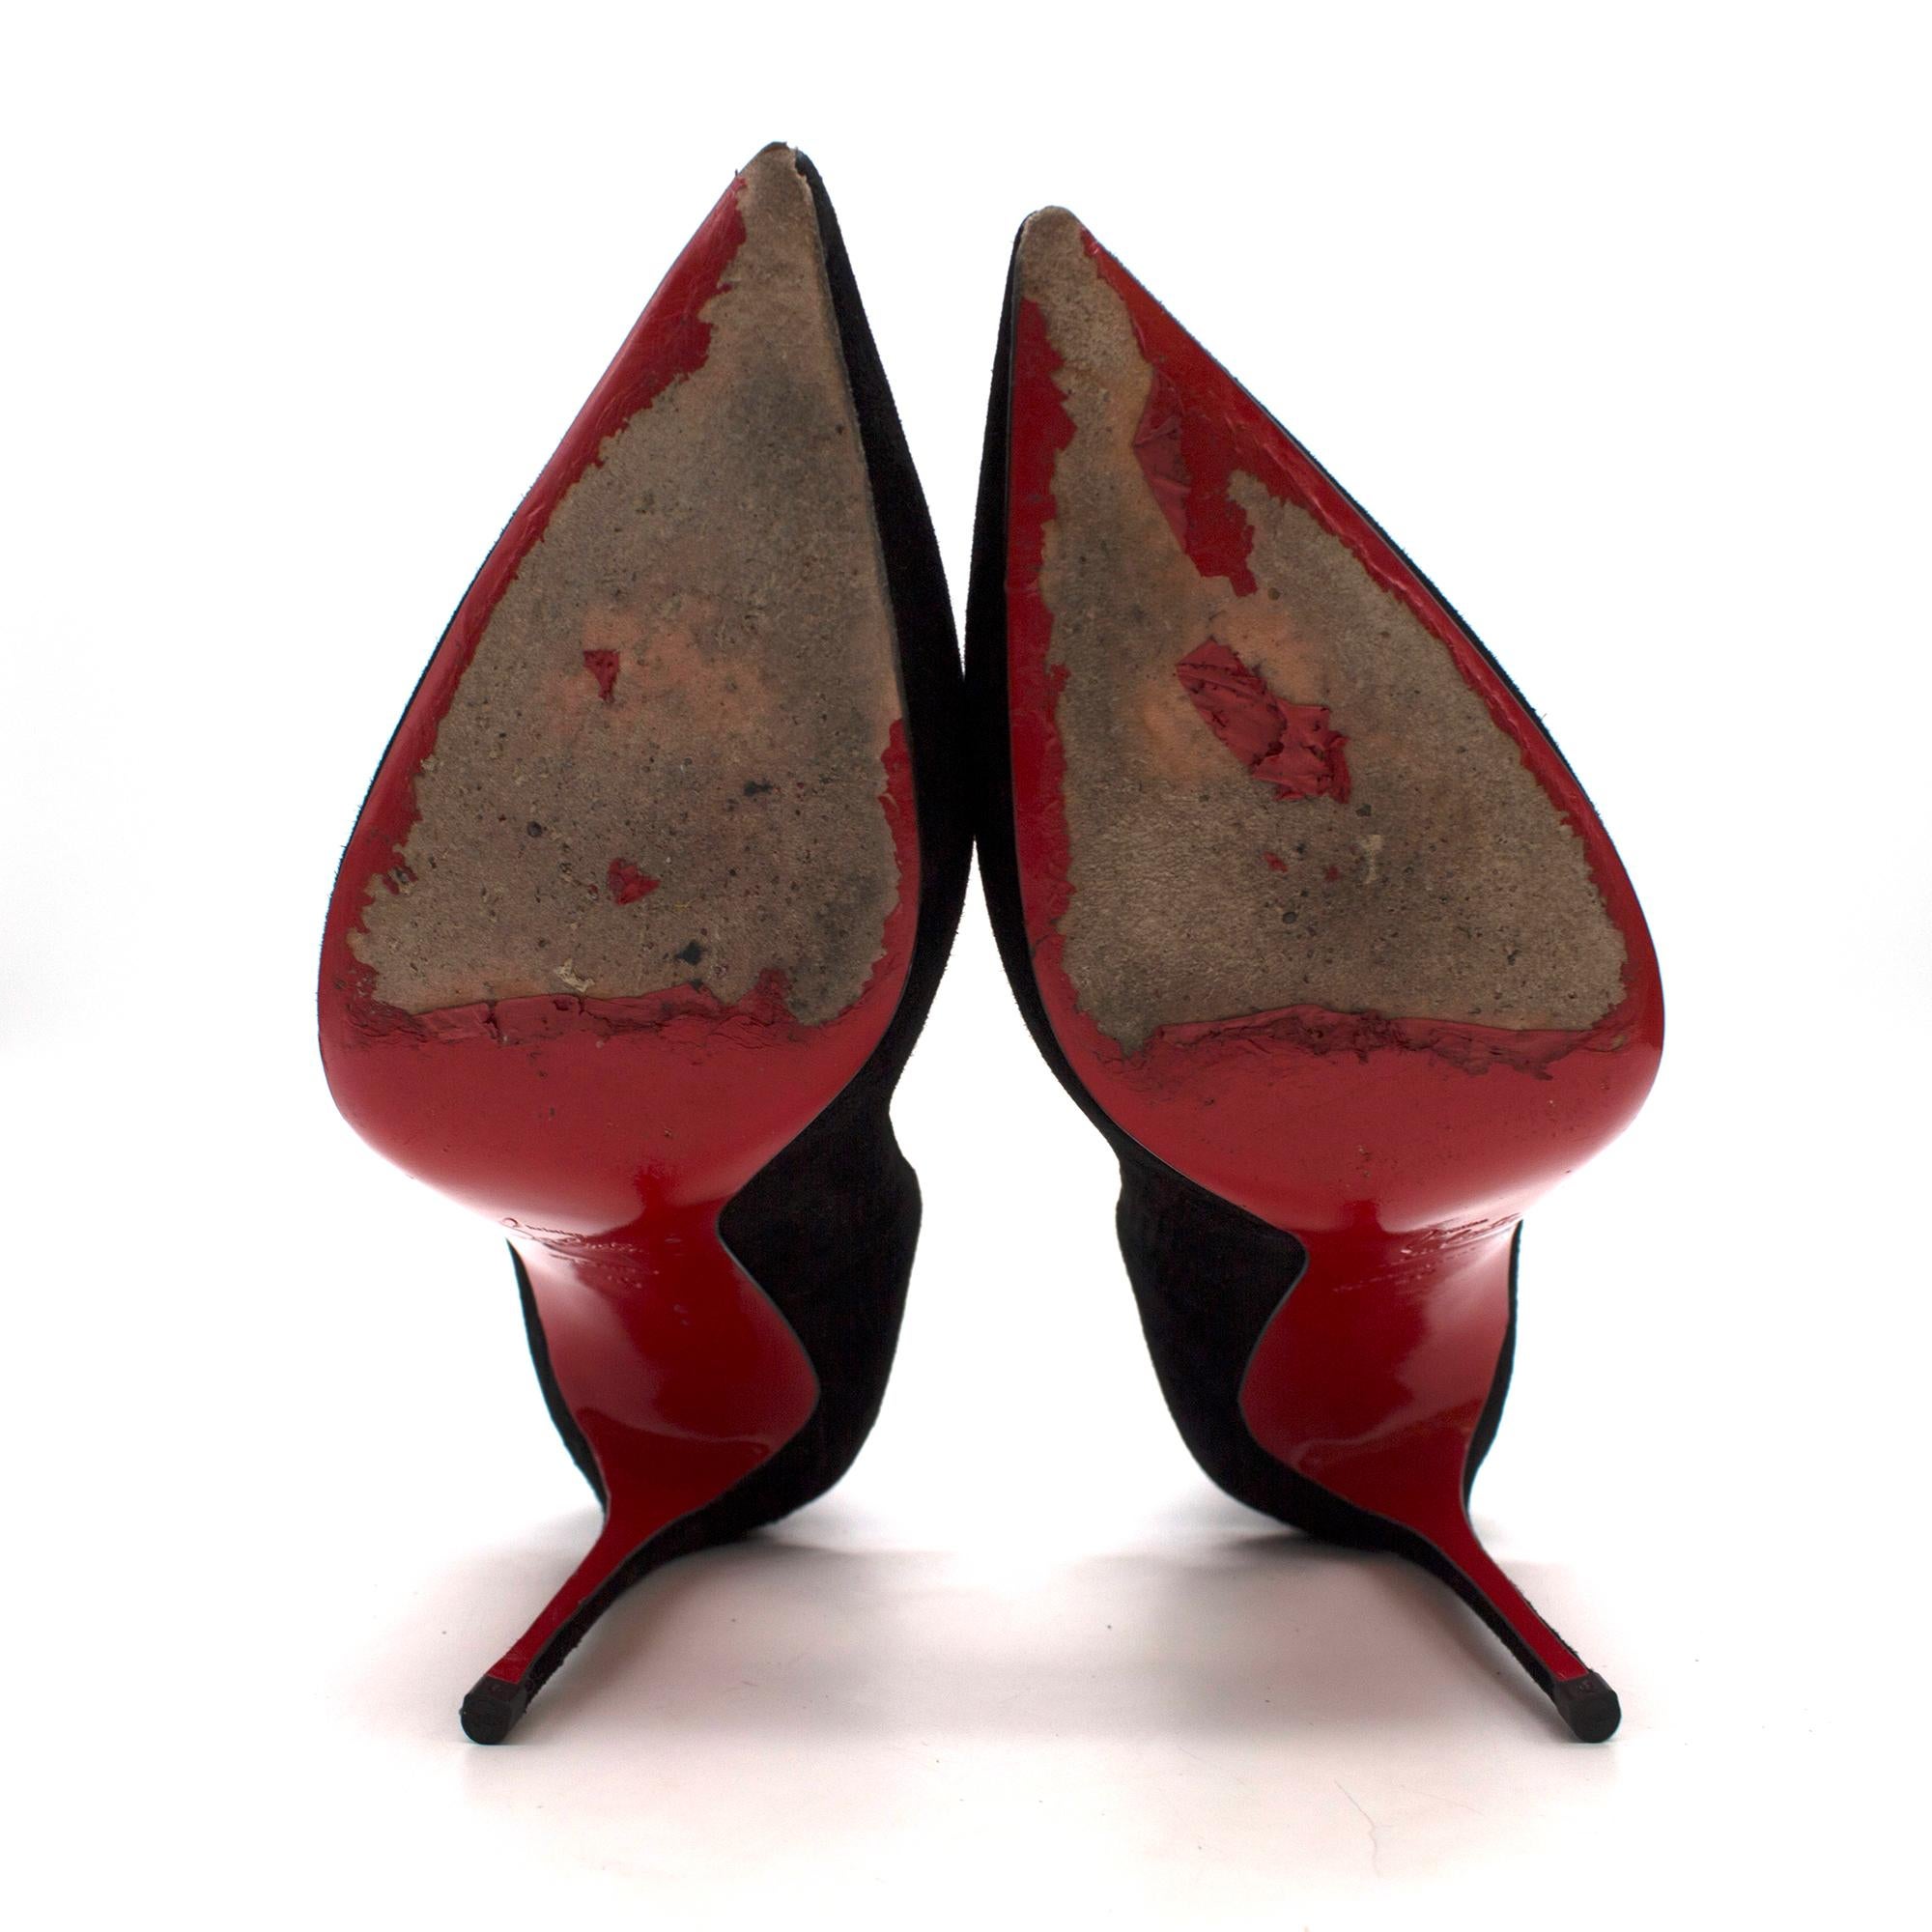 Christian Louboutin So Kate 120mm suede pumps US 8 im Zustand „Gut“ im Angebot in London, GB